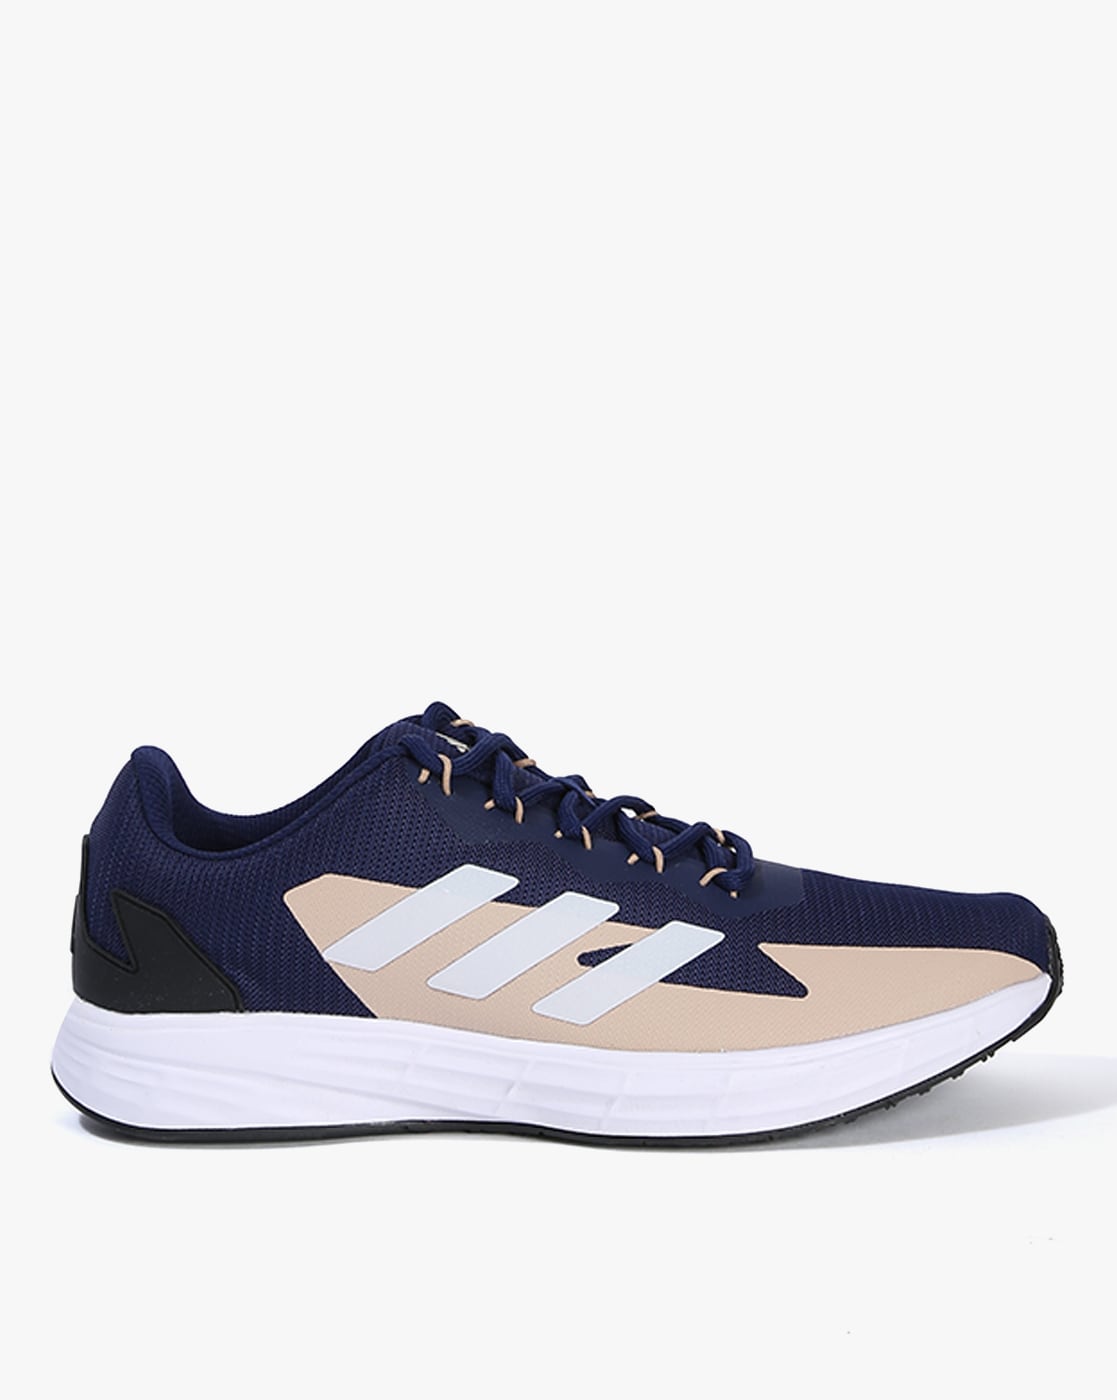 Buy Adidas NEO Men Navy Cacity Casual Shoes (8UK) at Amazon.in